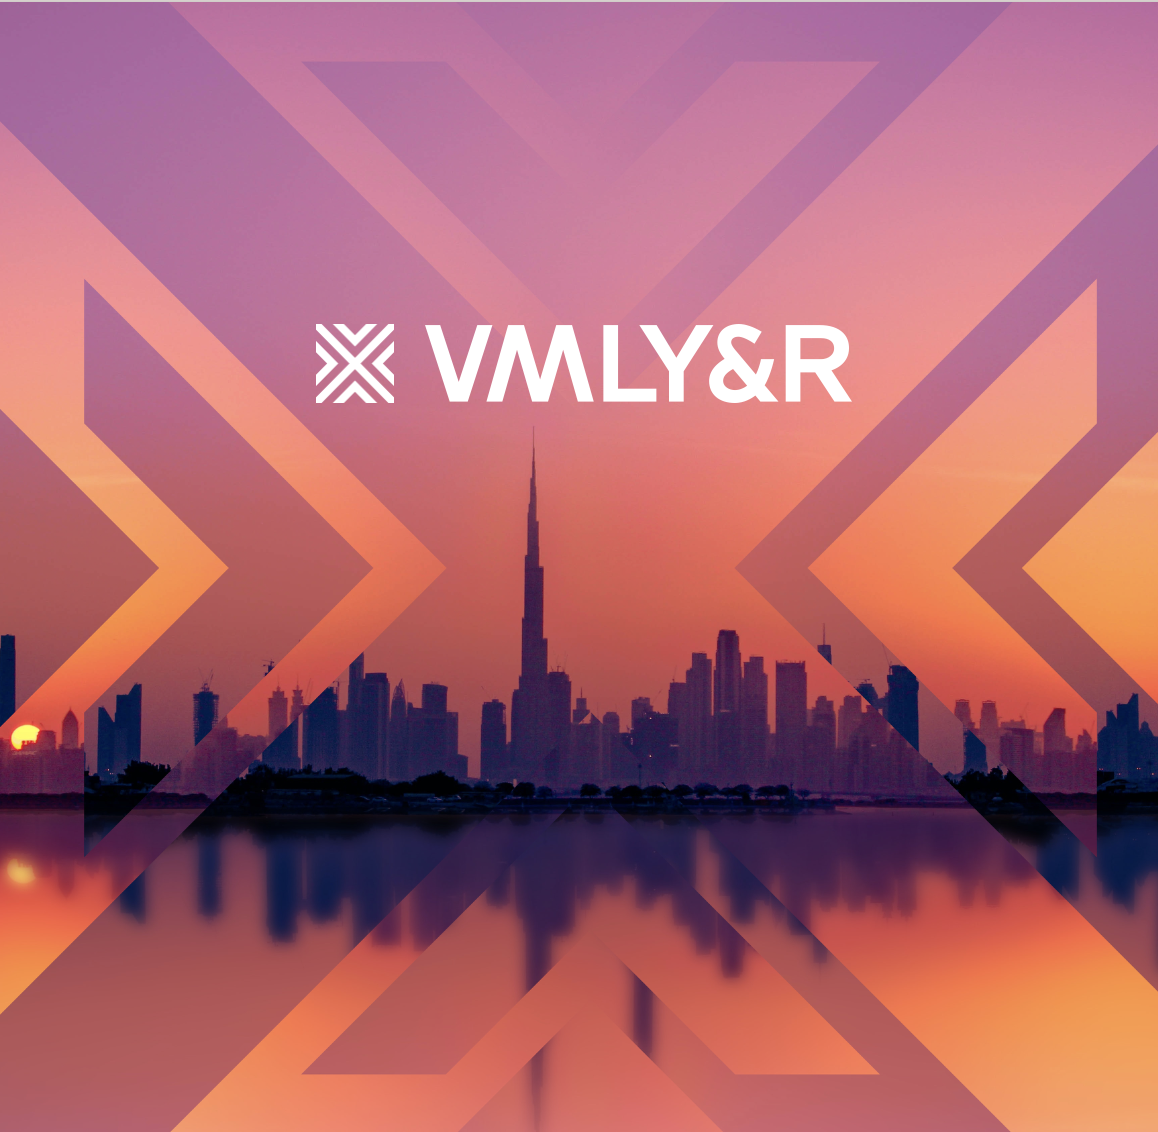 VMLY&R Middle East